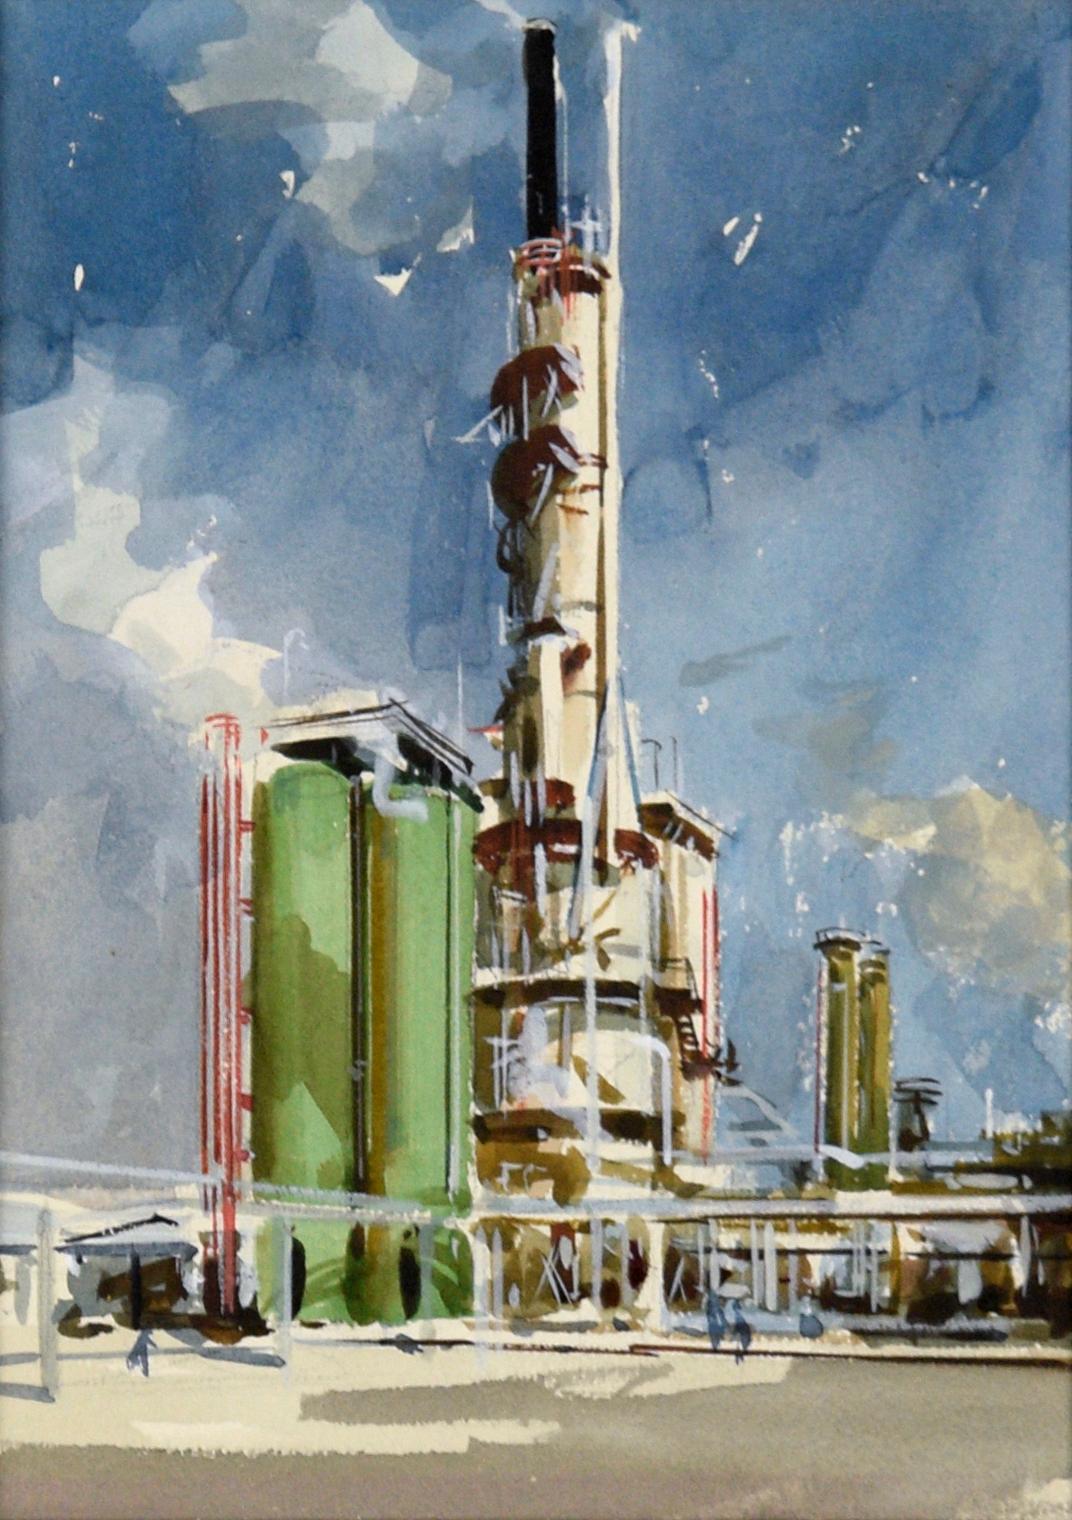 Smokestack at the Refinery – realistische industrielle Illustration in Gouache – Painting von Charles Kinghan